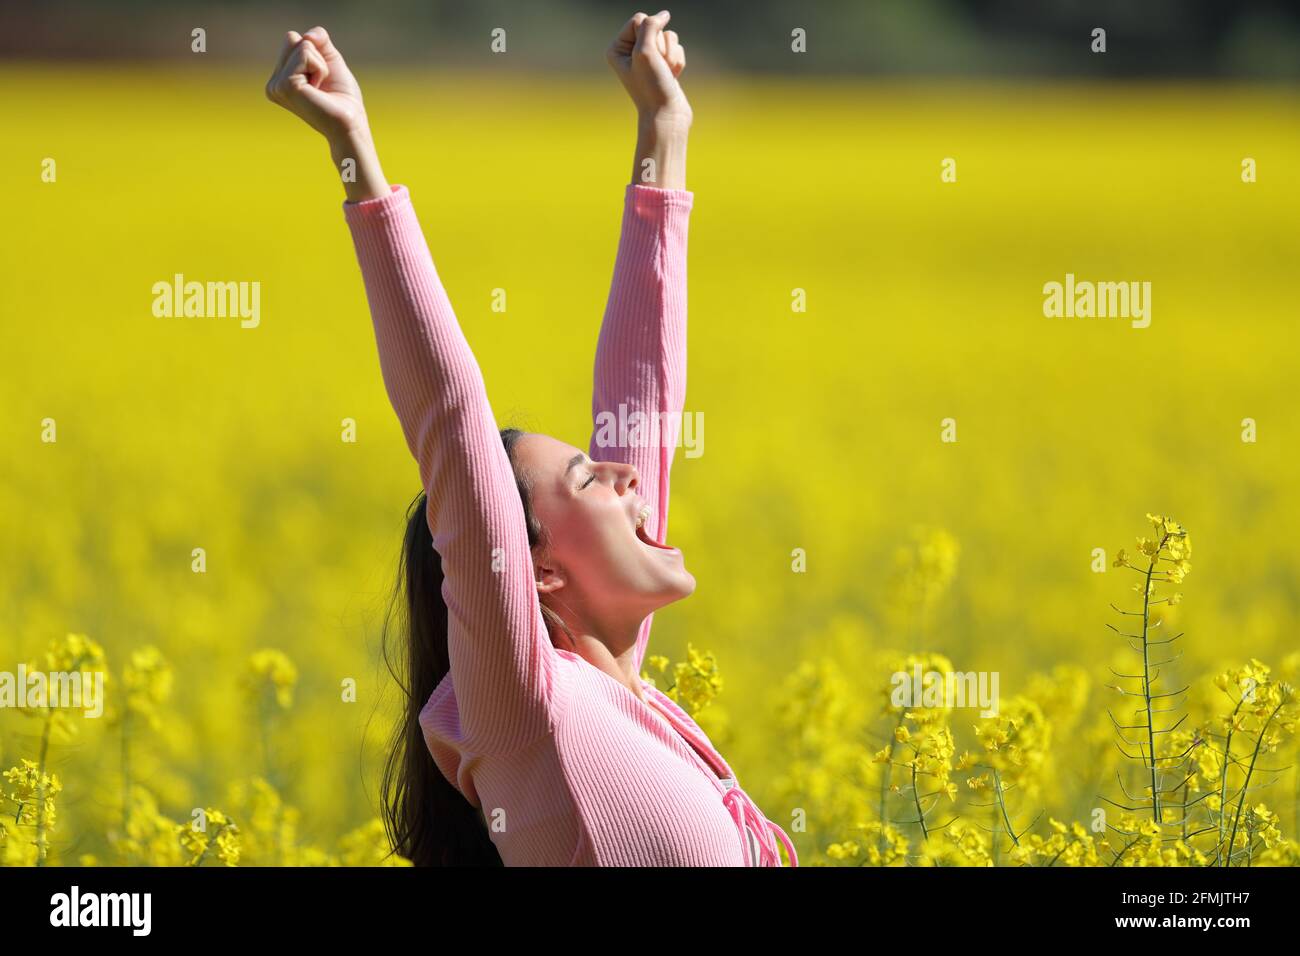 Side view portrait of an excited woman raising arms in a yellow field in spring season Stock Photo